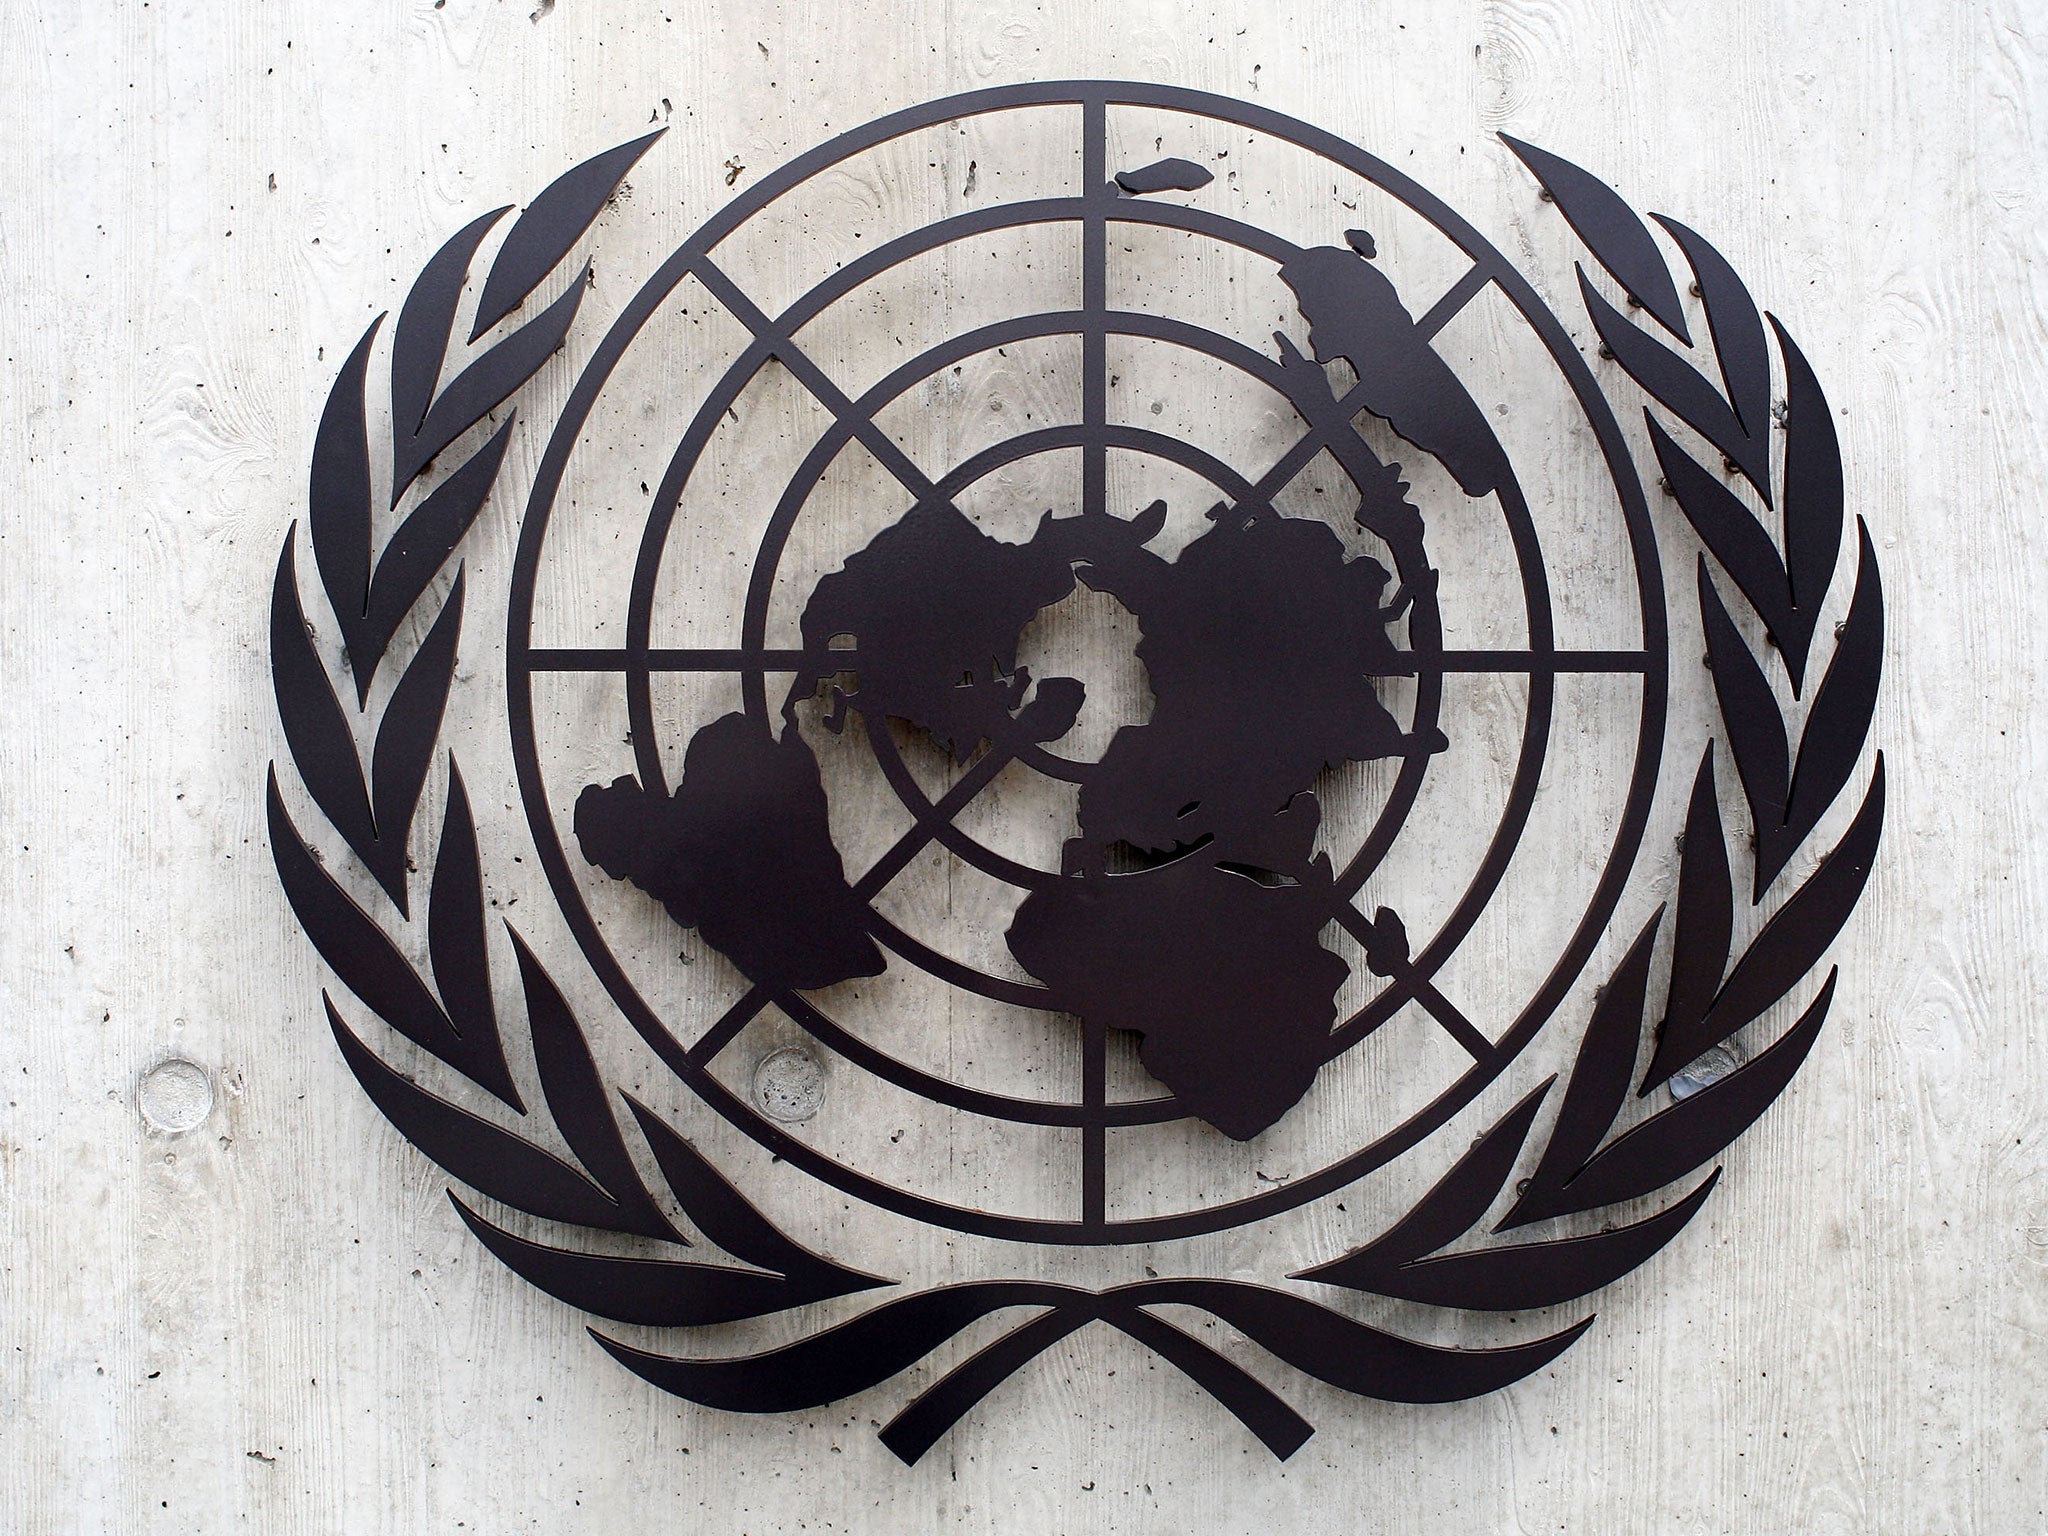 David Hyde is not being paid for his six-month internship at the United Nations